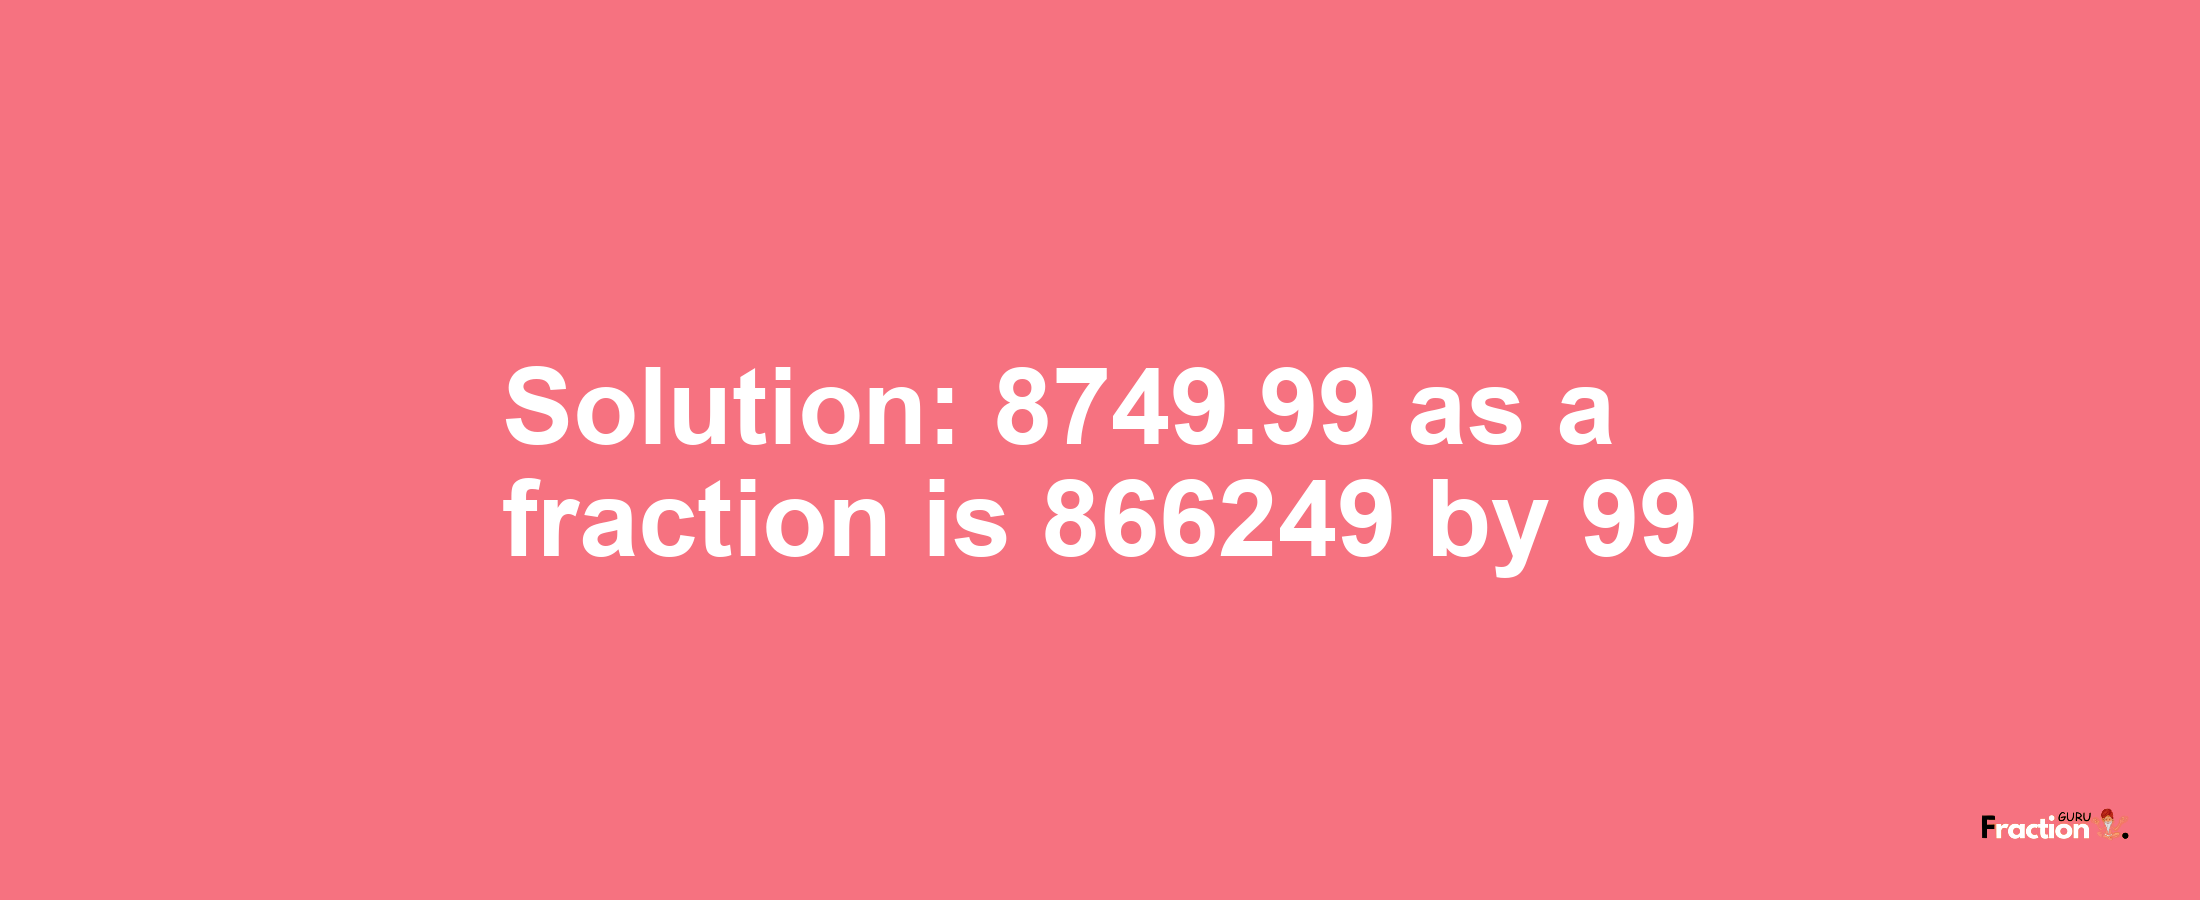 Solution:8749.99 as a fraction is 866249/99